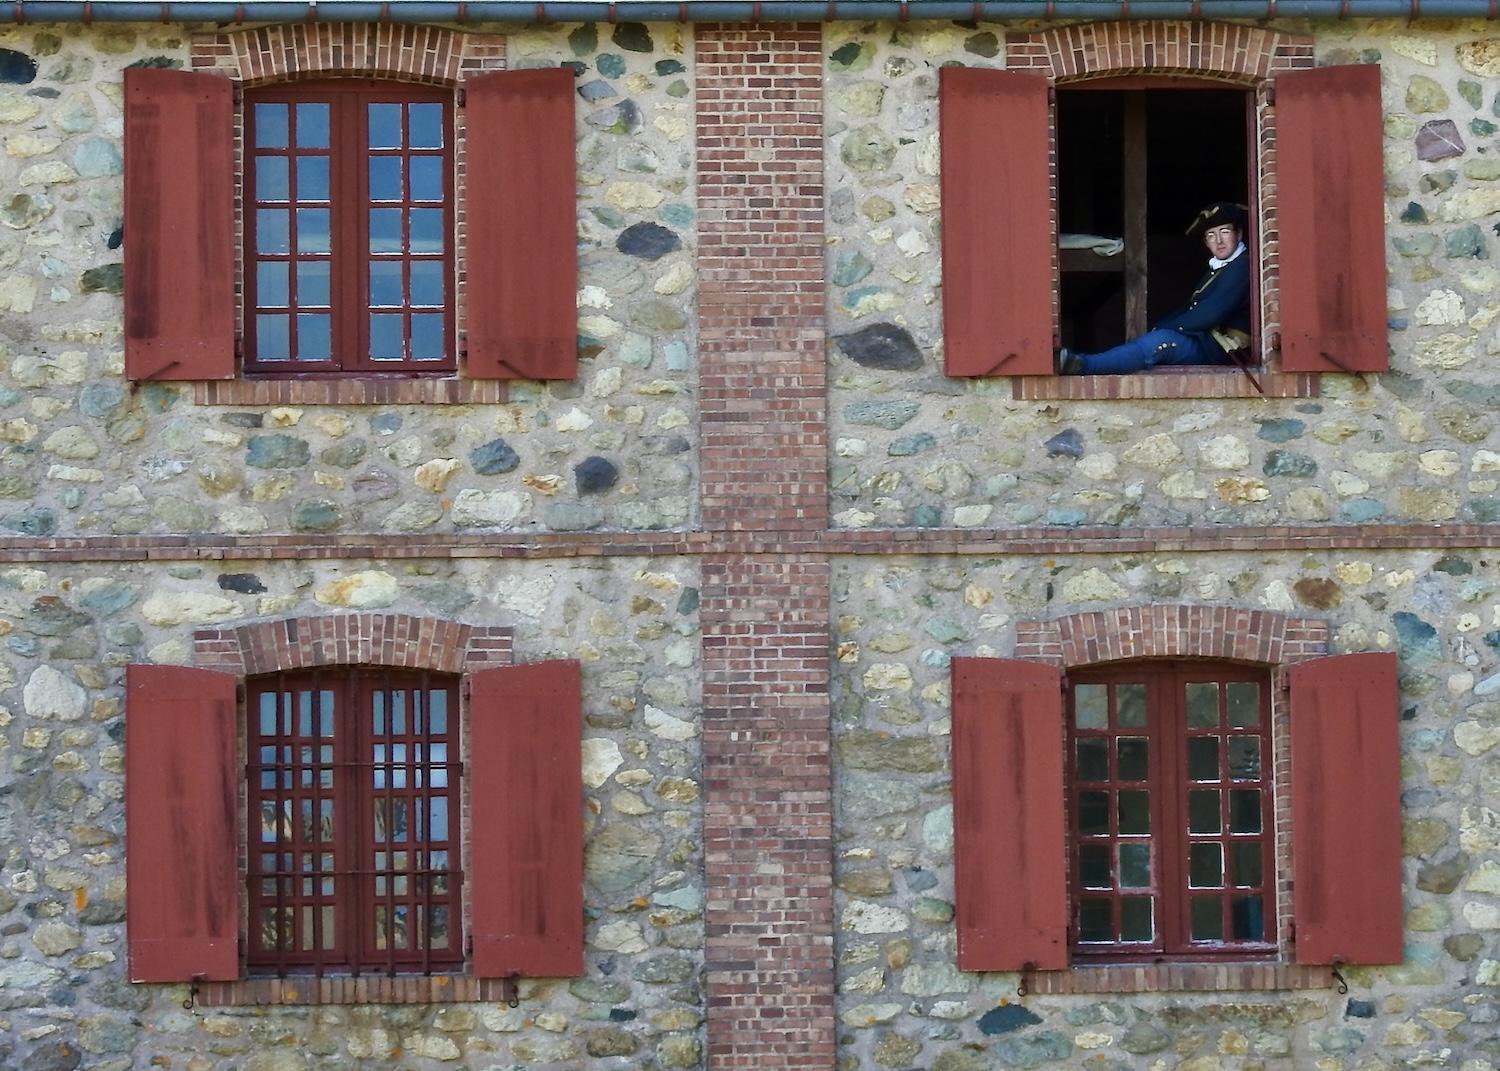 A costumed interpreter is seen resting in a window at the Fortress of Louisbourg National Historic Site.